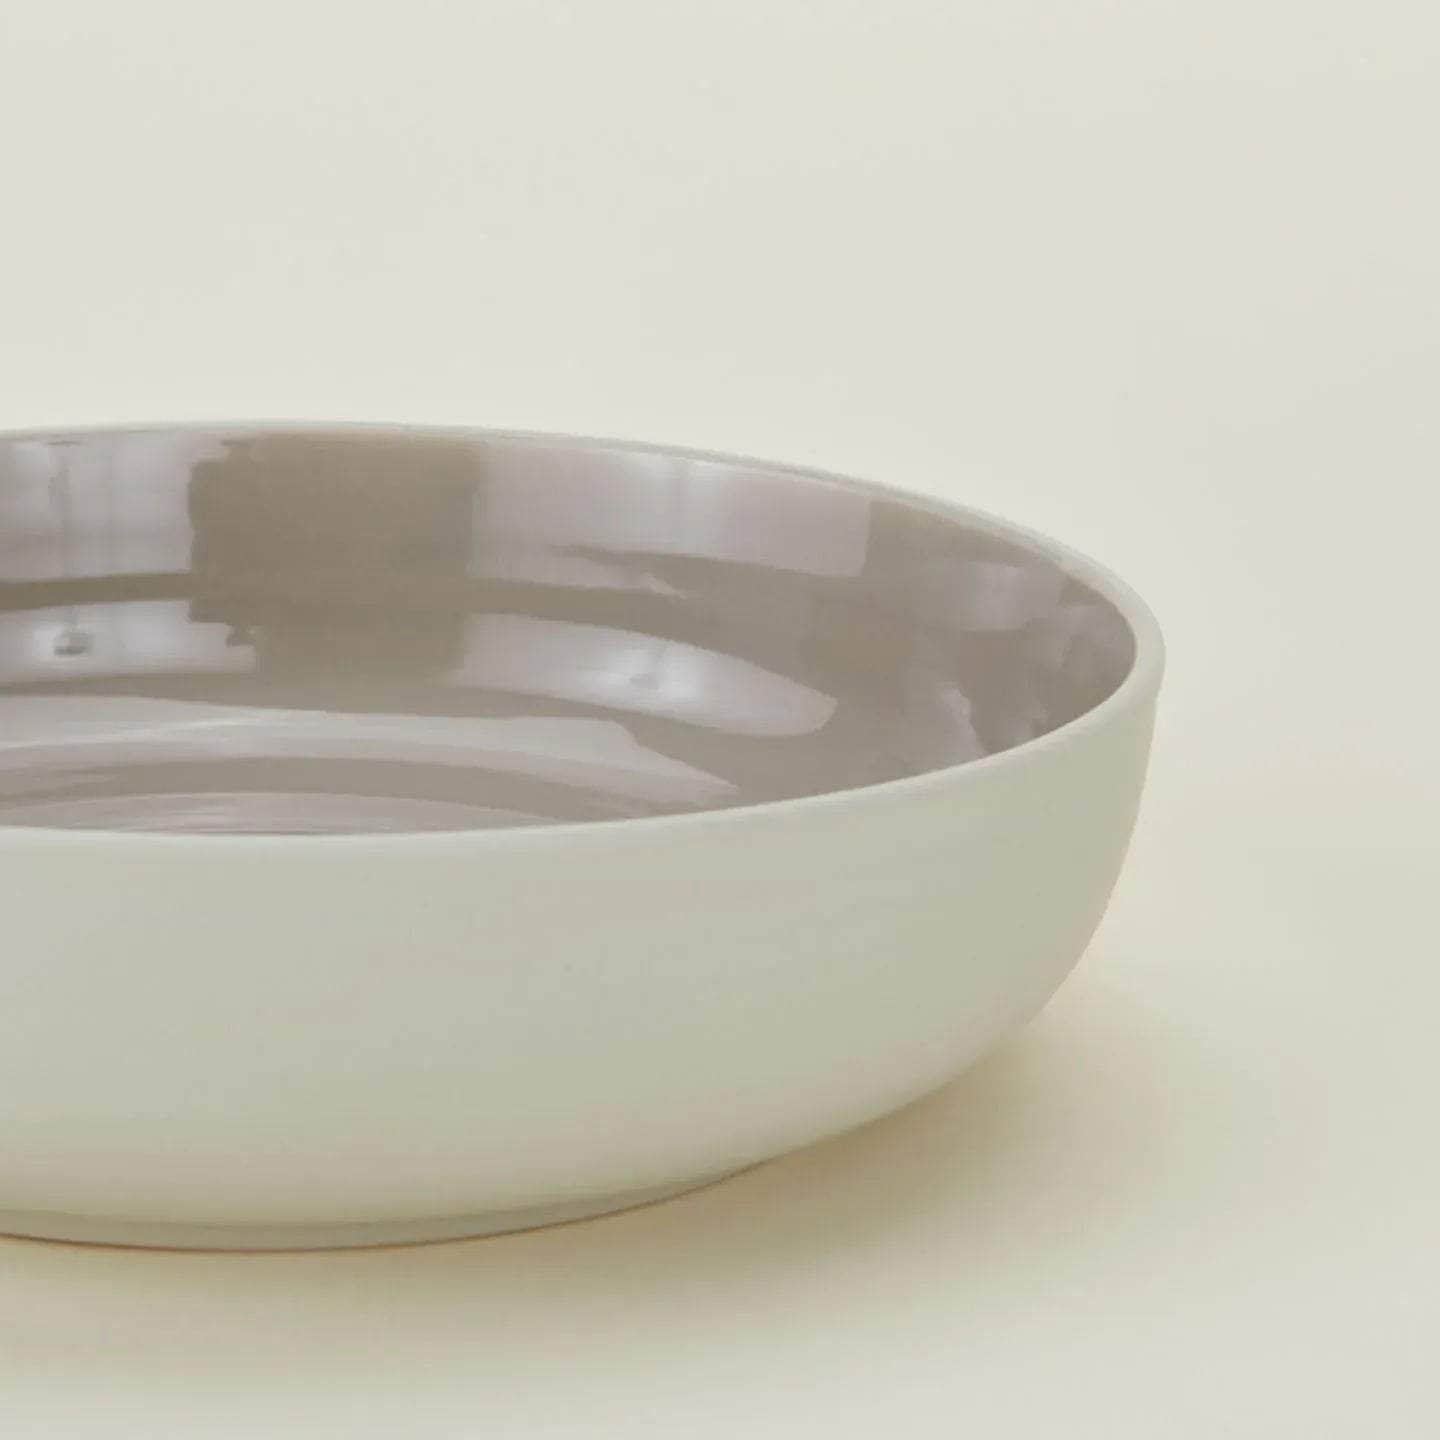 Load image into Gallery viewer, Essential Low Bowl - Set Of 4, Light Grey
